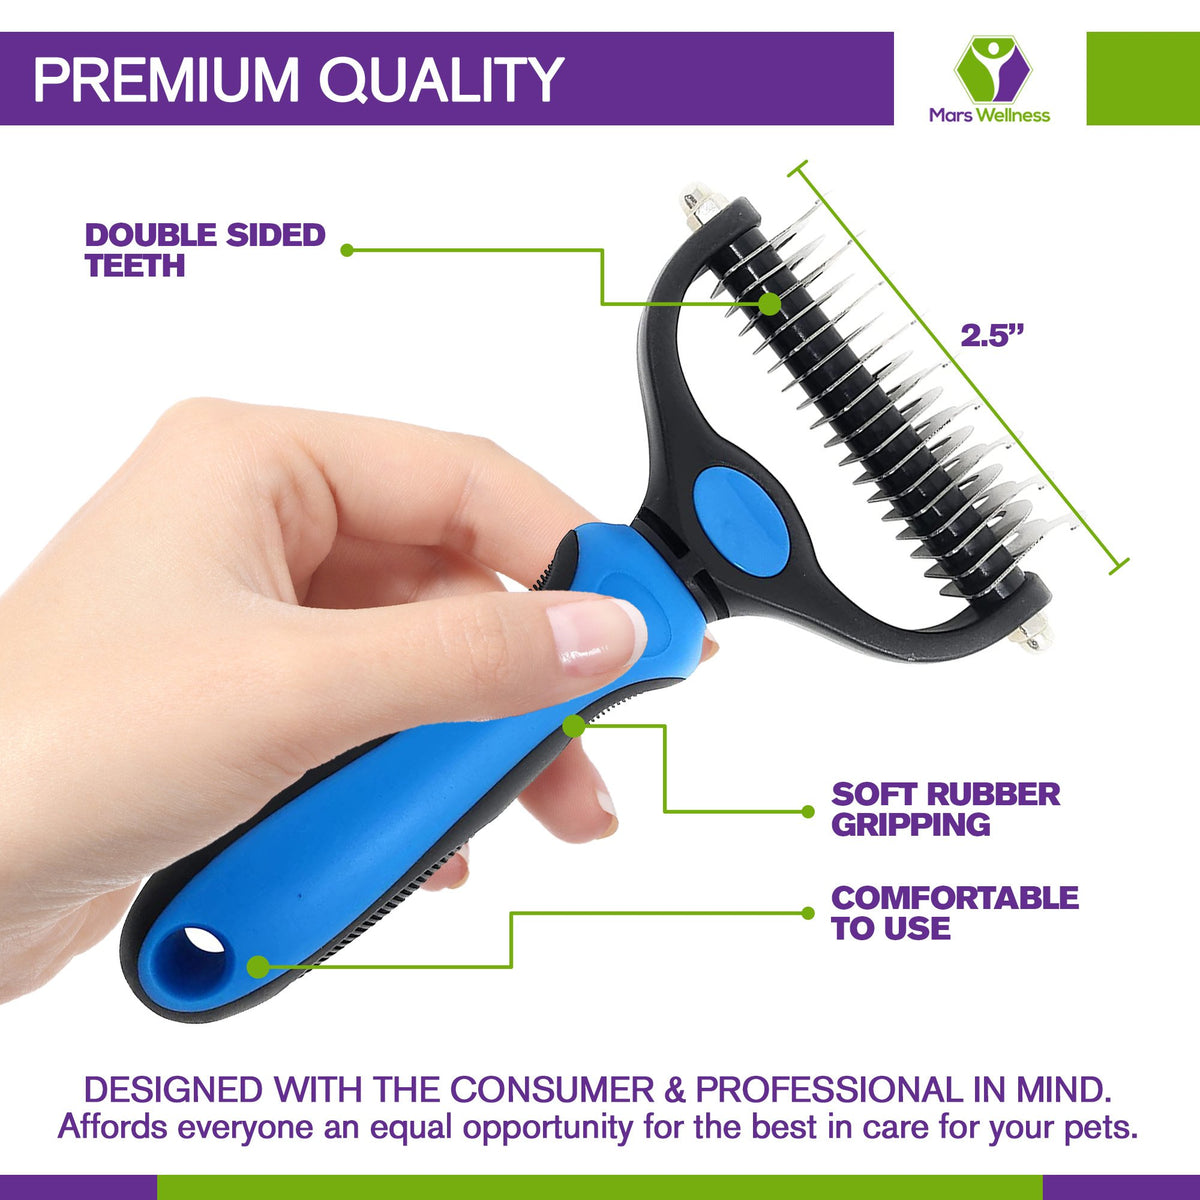 MARS WELLNESS Pet Grooming Brush - Double Sided Shedding and Dematting Tool  for Cats and Dogs - Large - Mars Med Supply